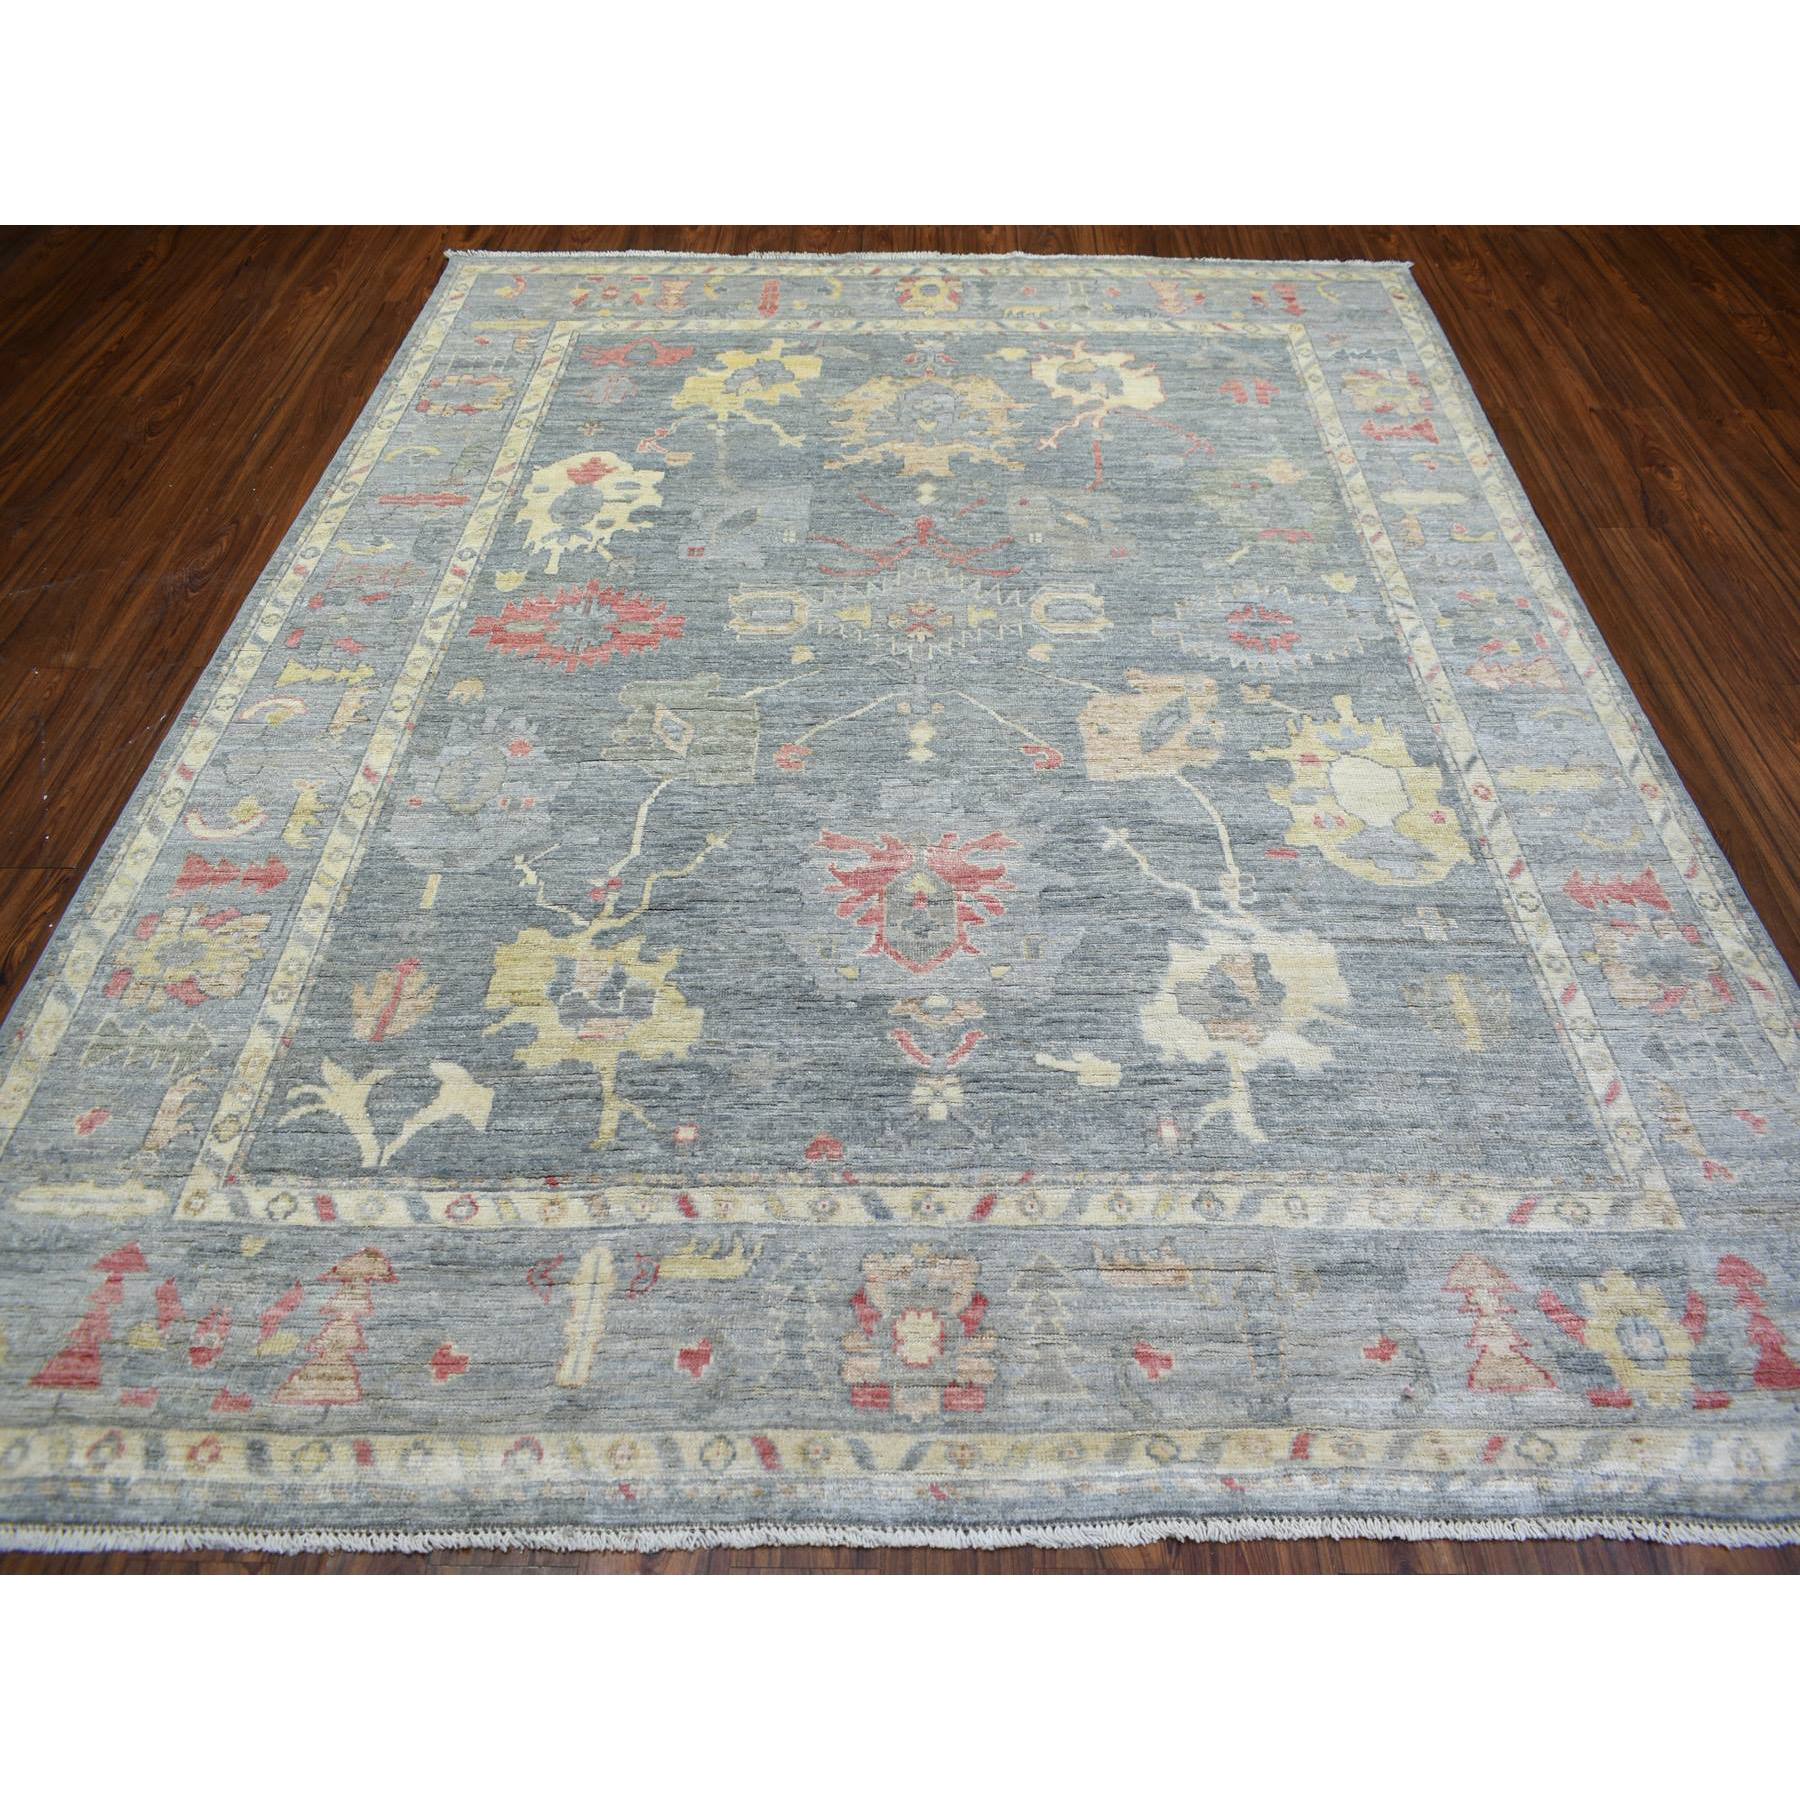 8'x9'8" Gray Angora Oushak Soft Colors With Leaf Design Natural Dyes, Afghan Wool Hand Woven Oriental Rug 